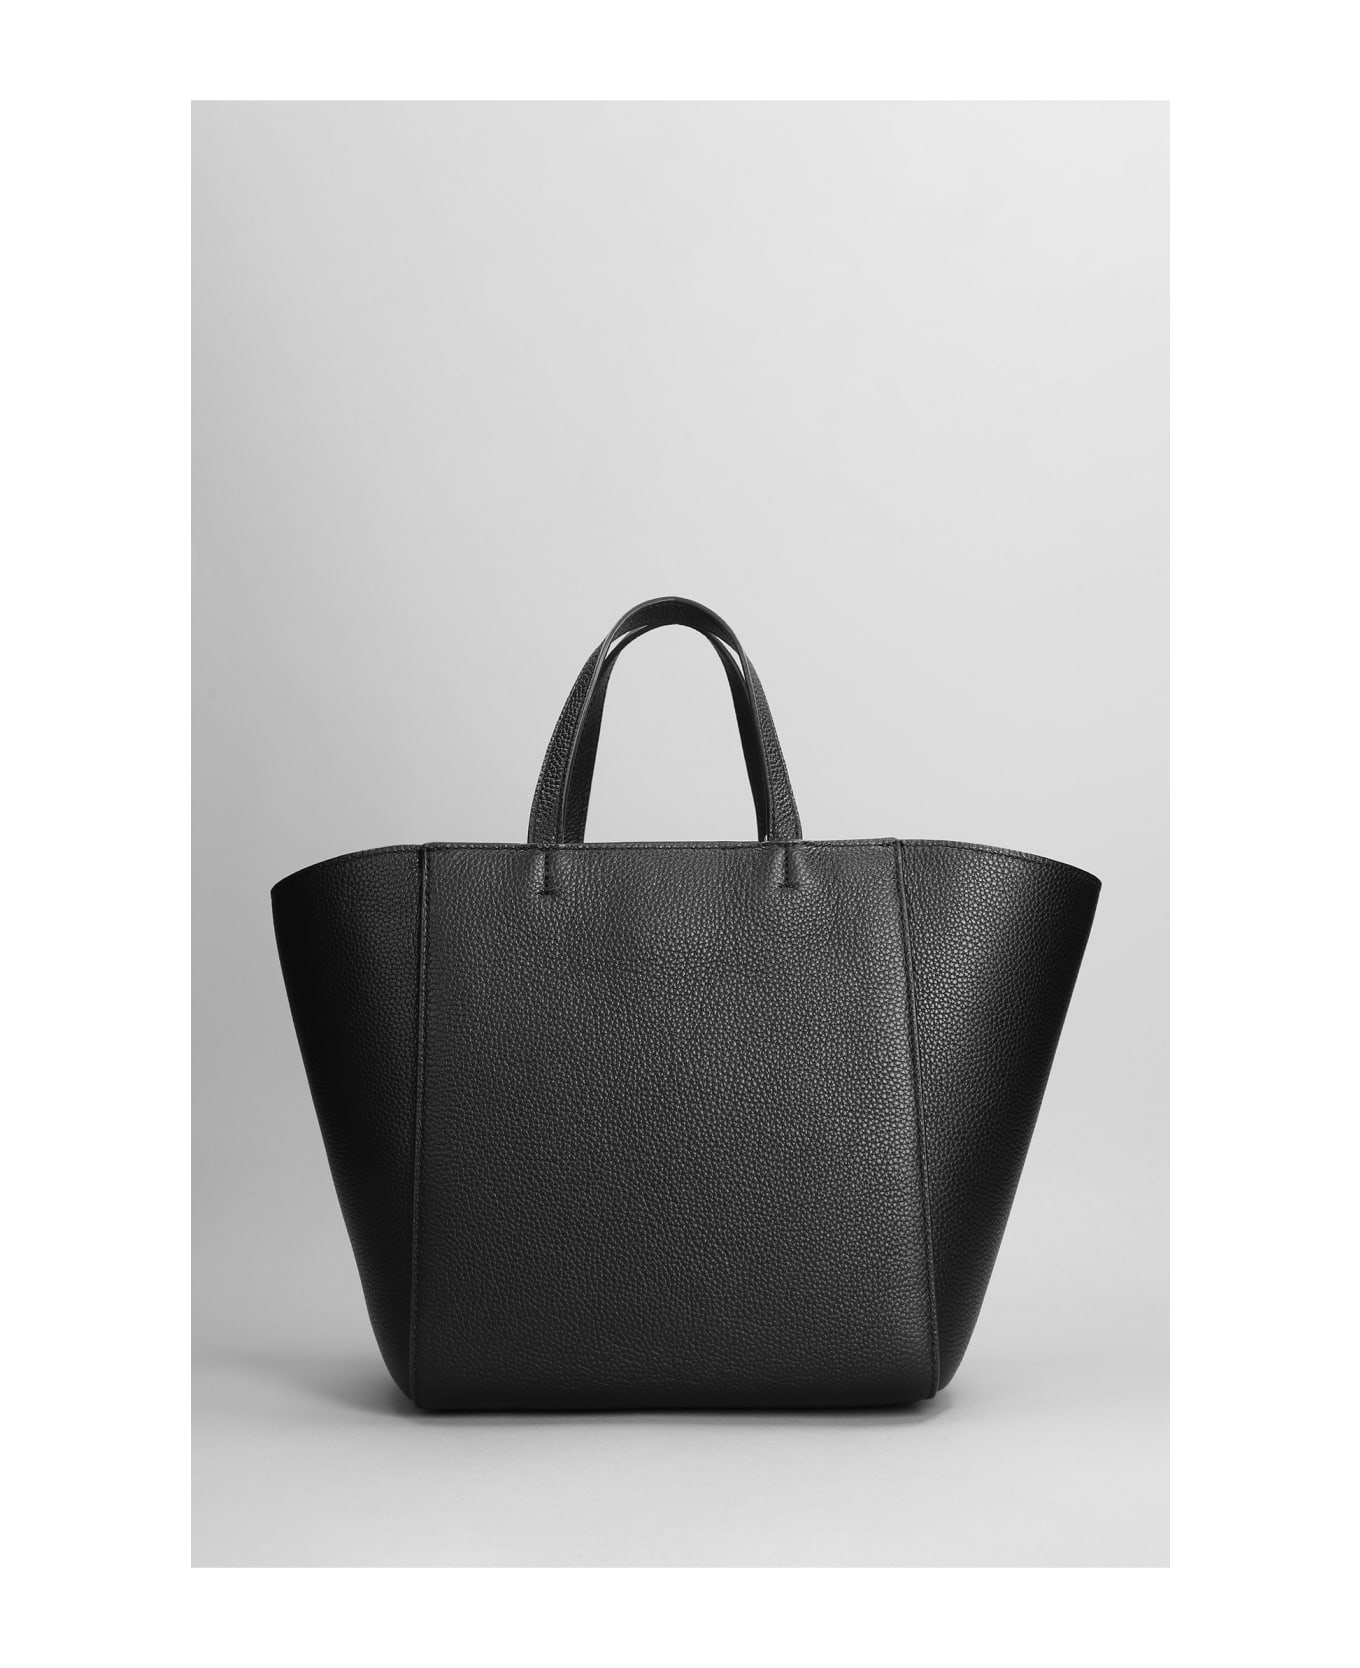 Tory Burch Mcgraw Tote In Black Leather - black